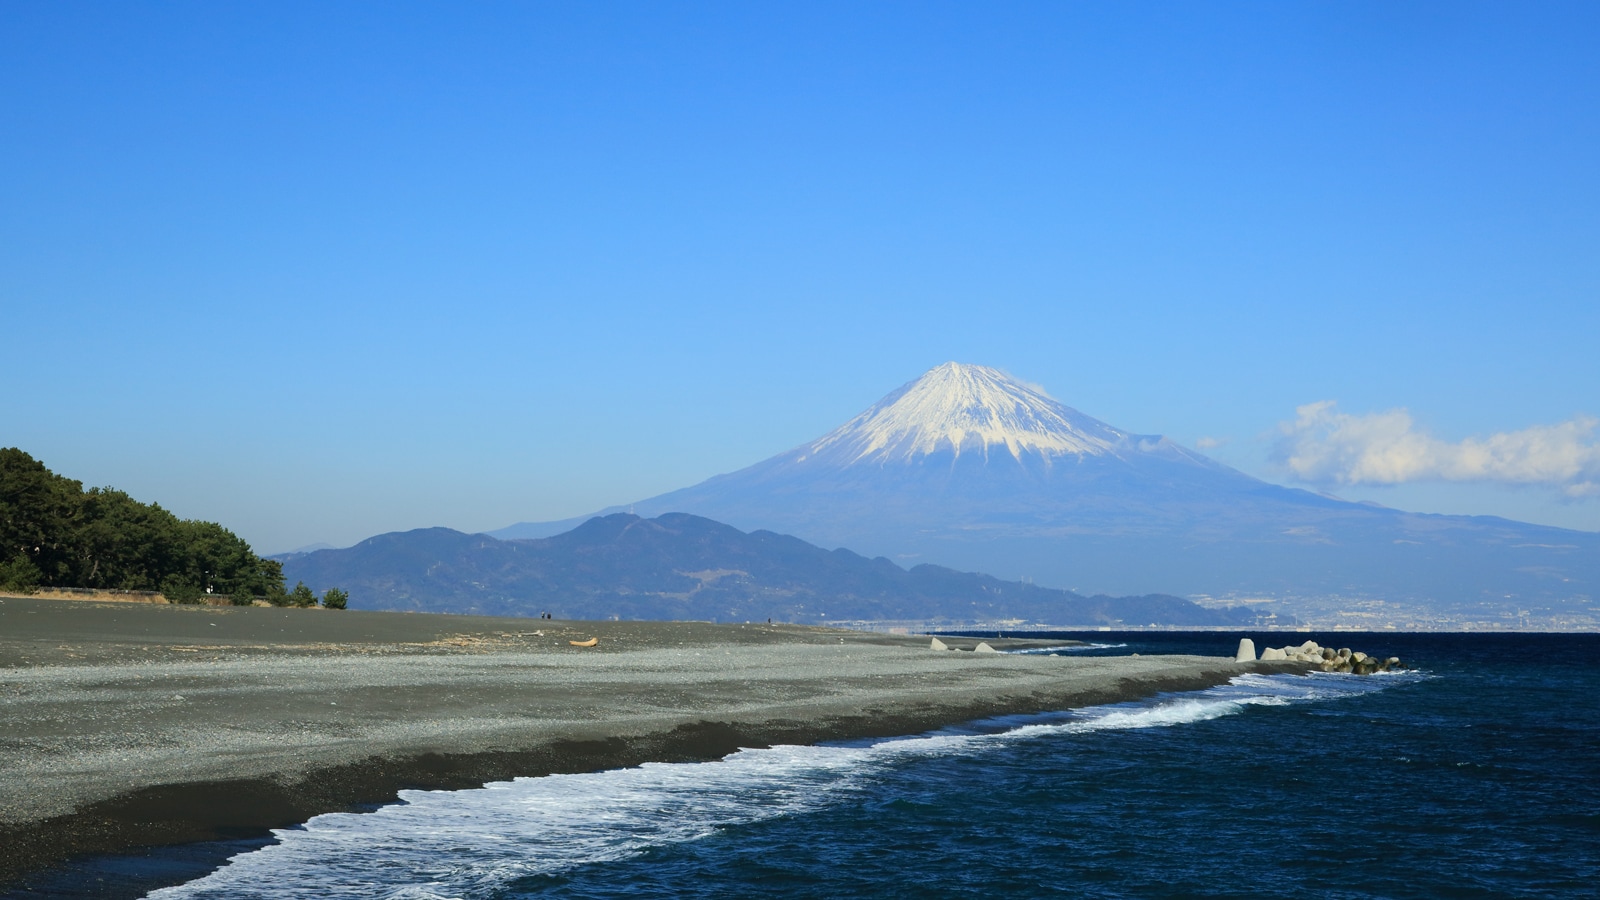 * [Sightseeing around] Miho no Matsubara: The view of Mt. Fuji from here is exceptional.